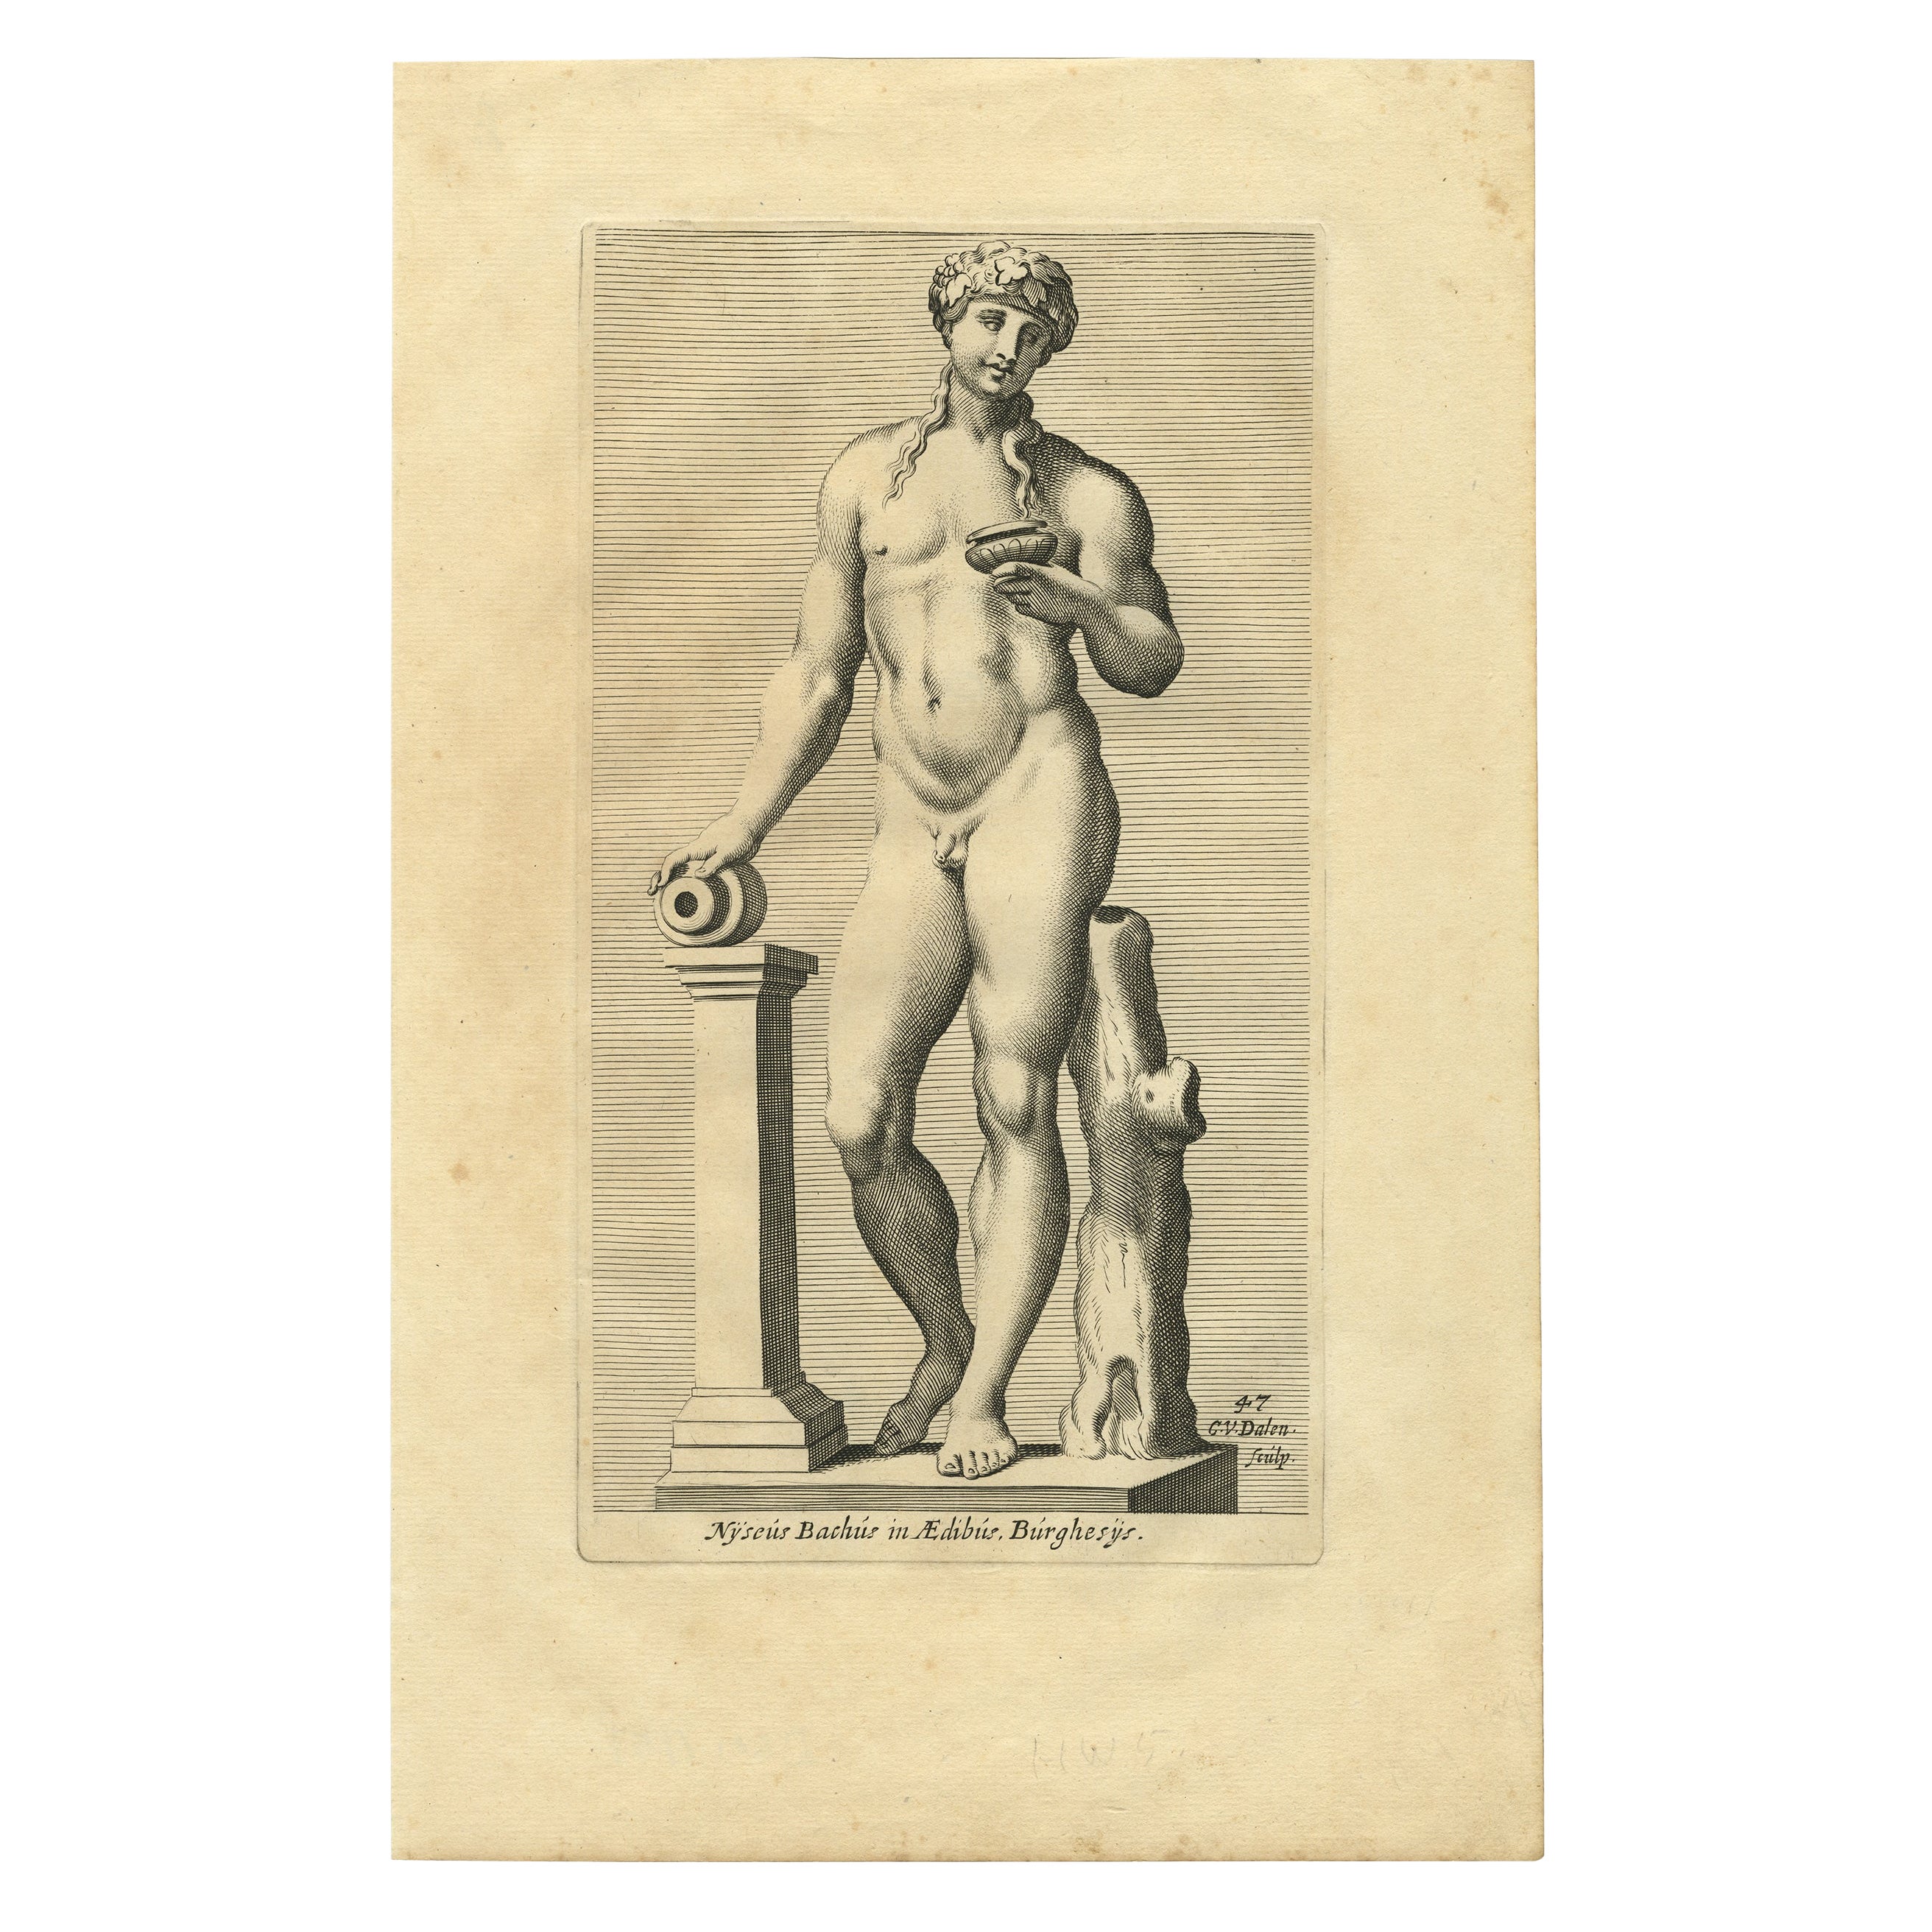 Old Print of Bacchus or Dionysus, God of the Wine and Religious Ecstasy, 1660